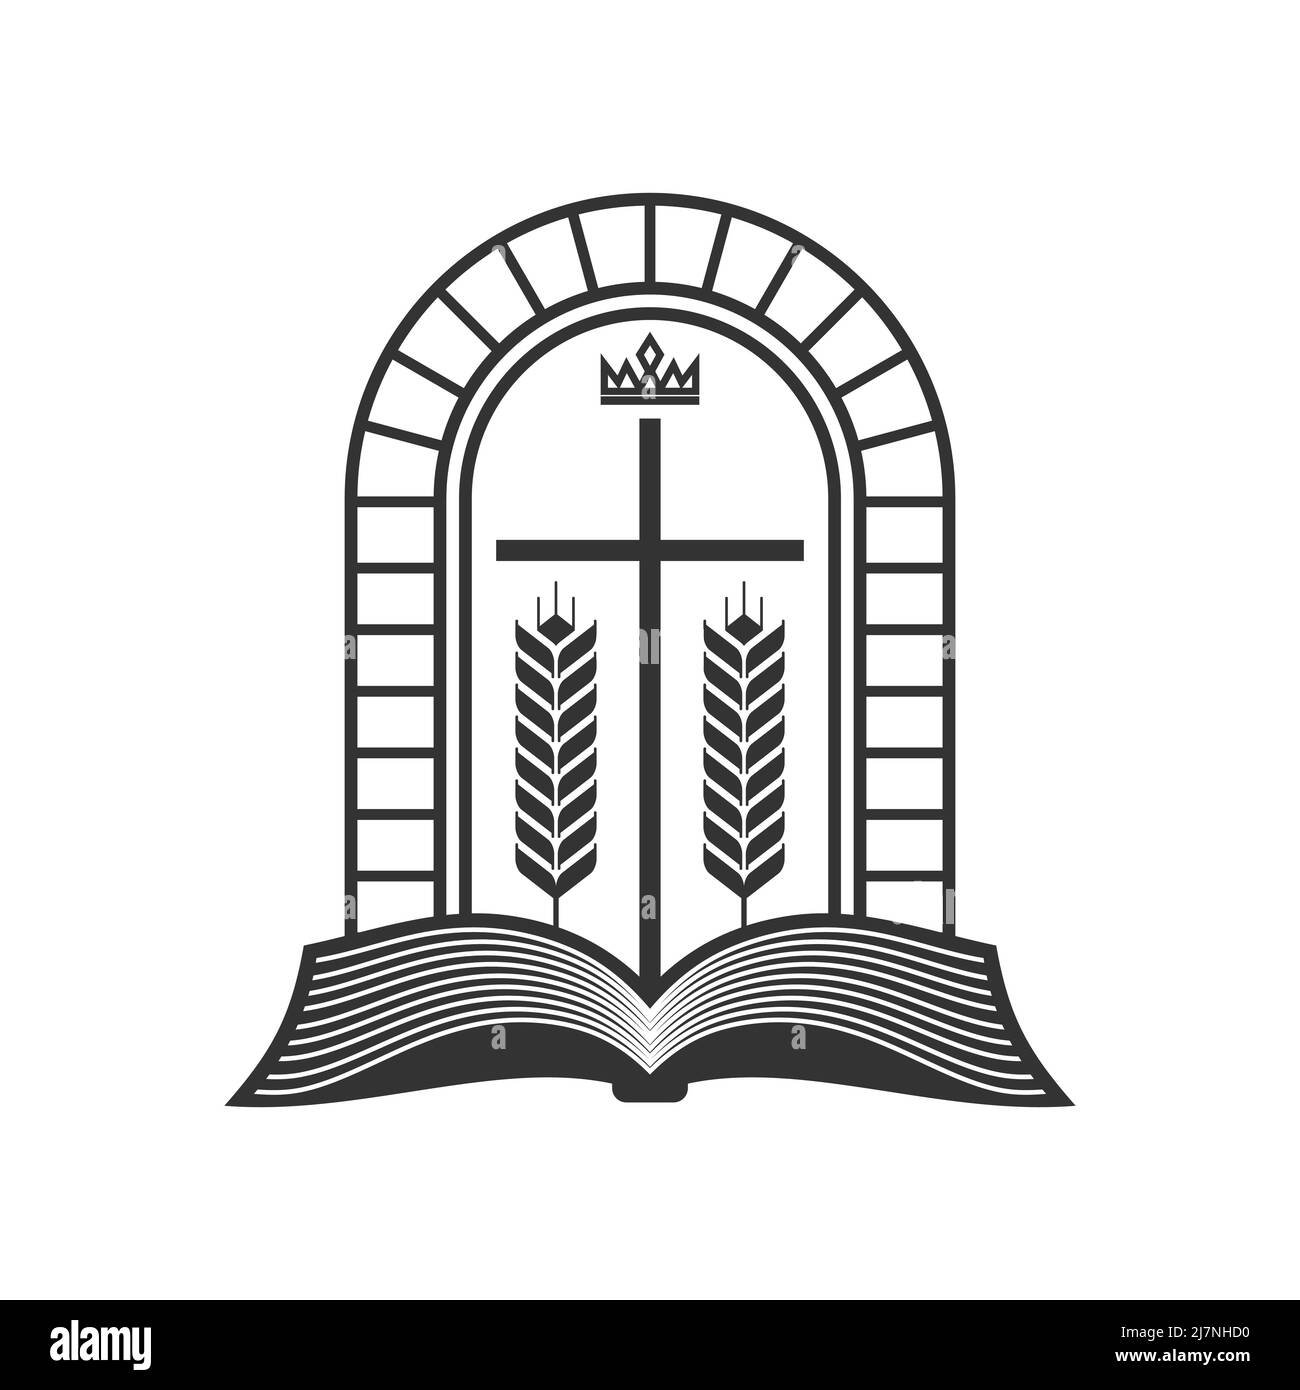 Christian illustration. Church logo. Open bible, ripe ears of corn and the cross of Jesus. Stock Vector